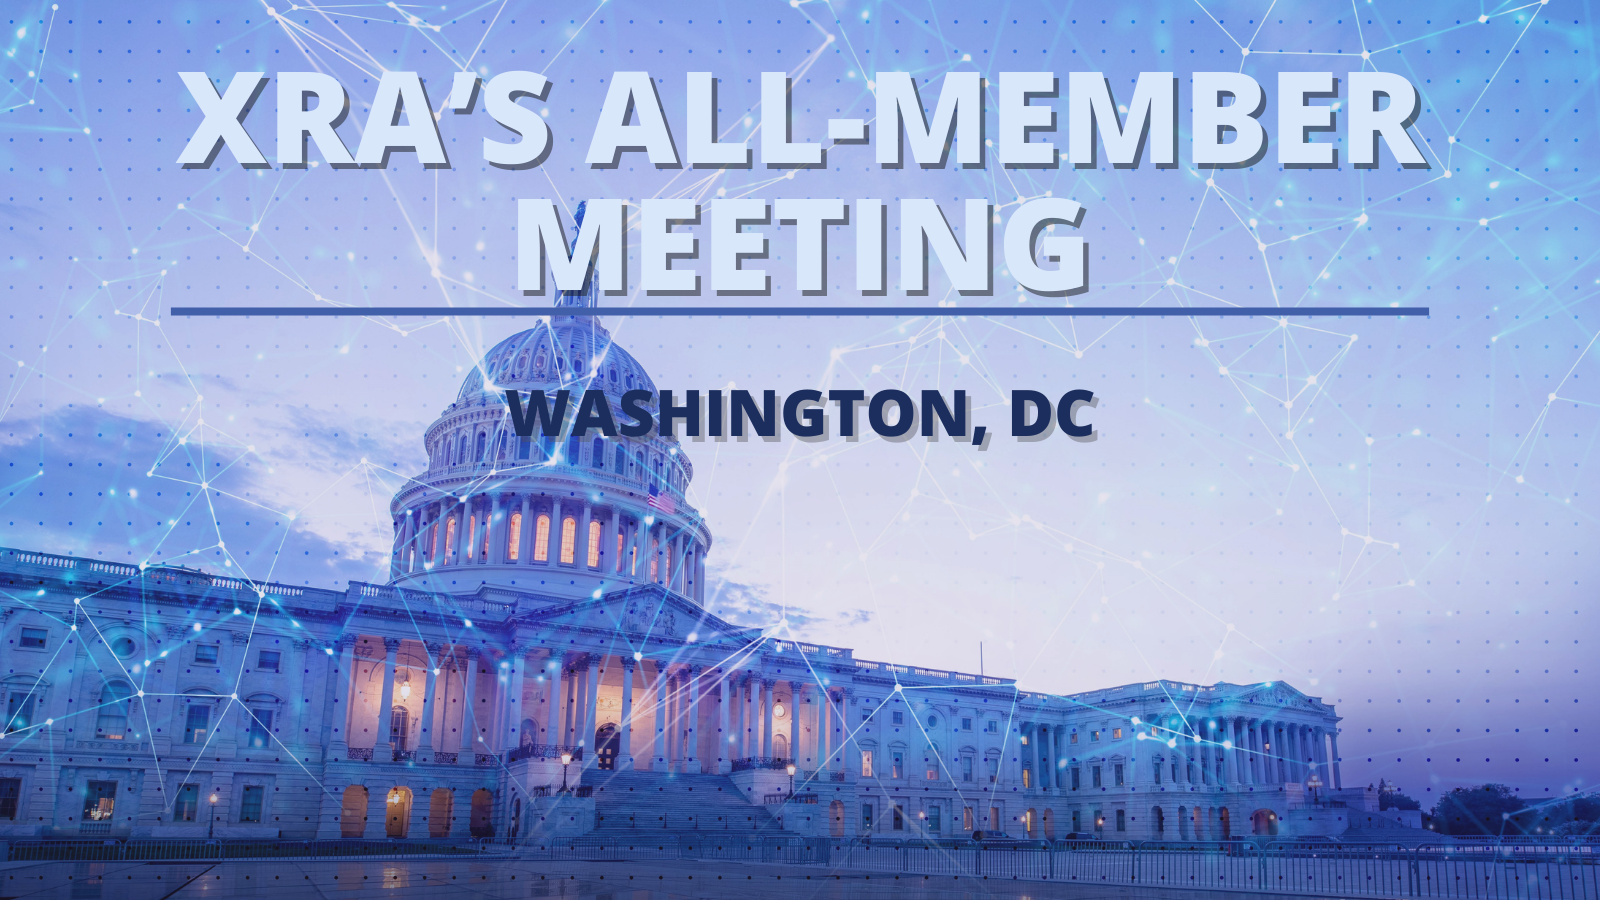 ATTEND XRA’S ALL-MEMBER MEETING